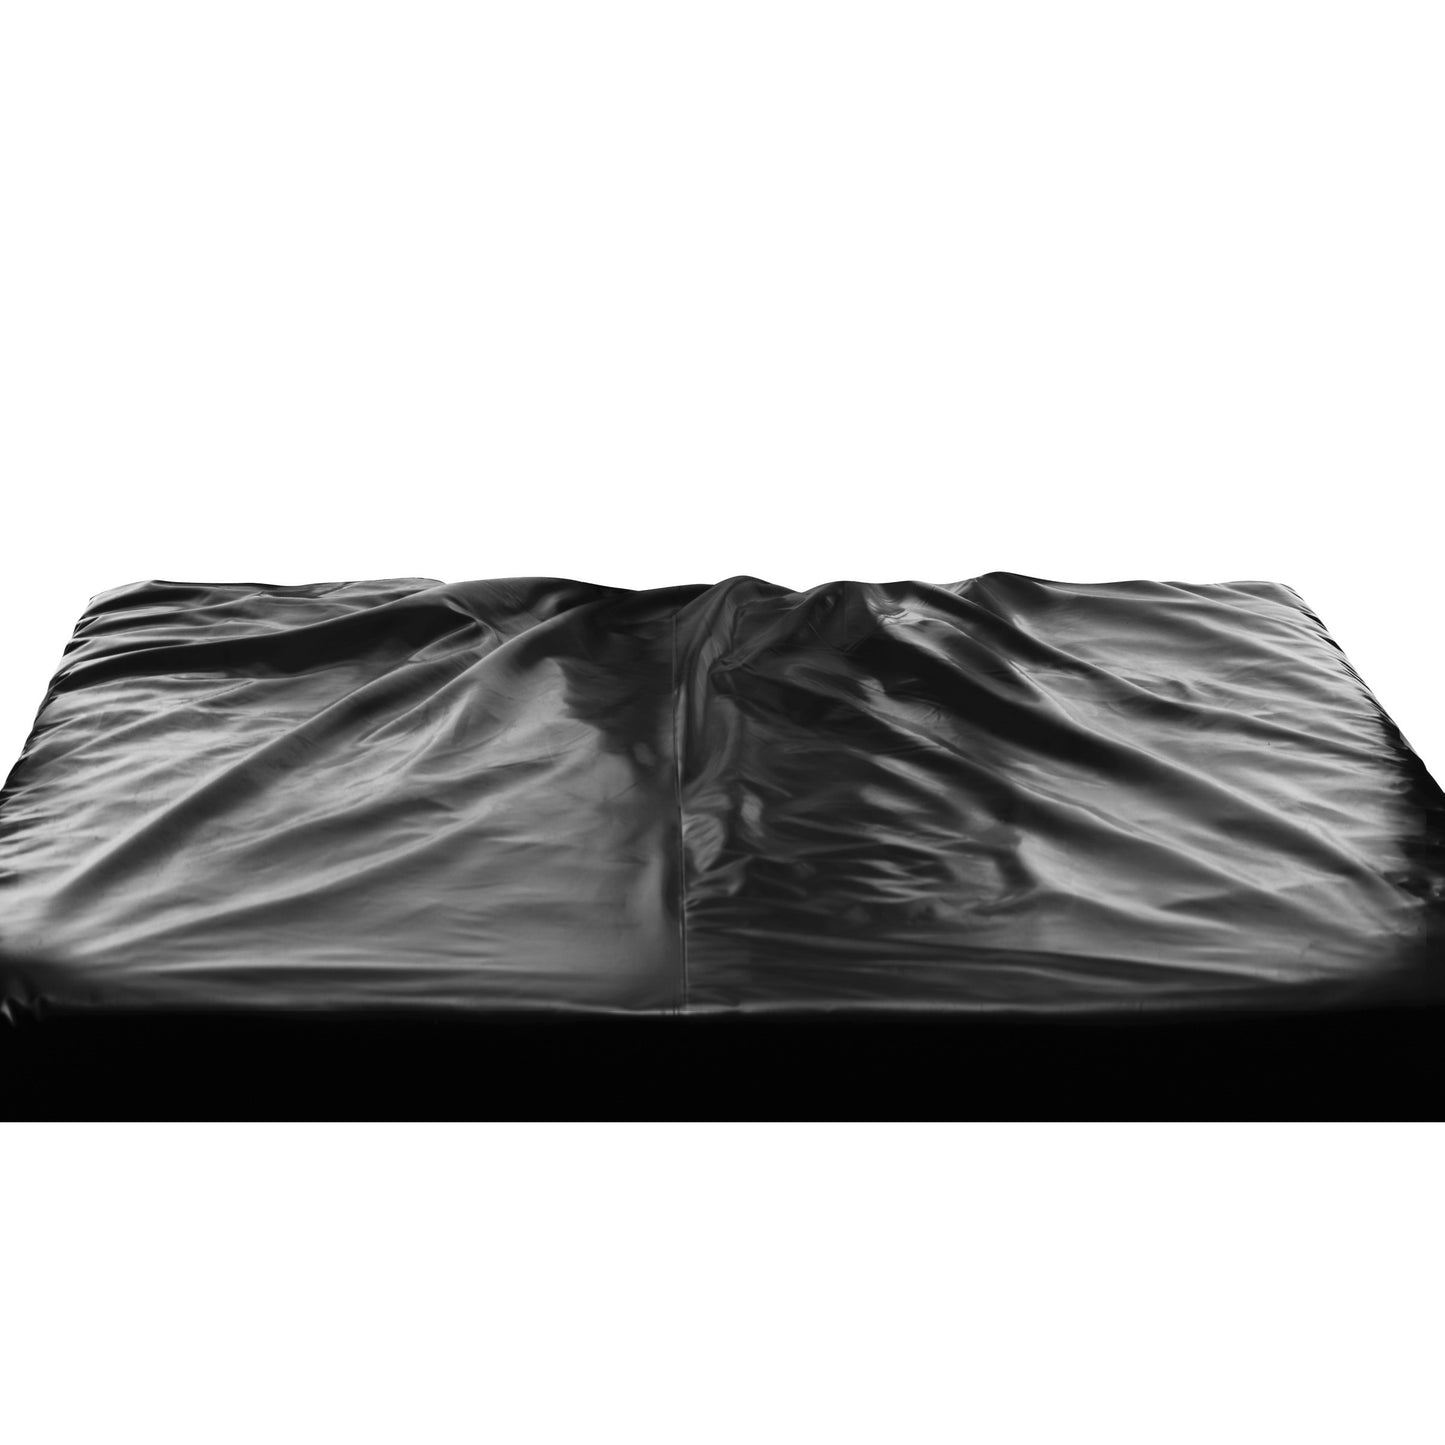 King Size Waterproof Fitted Sex Sheet - UABDSM